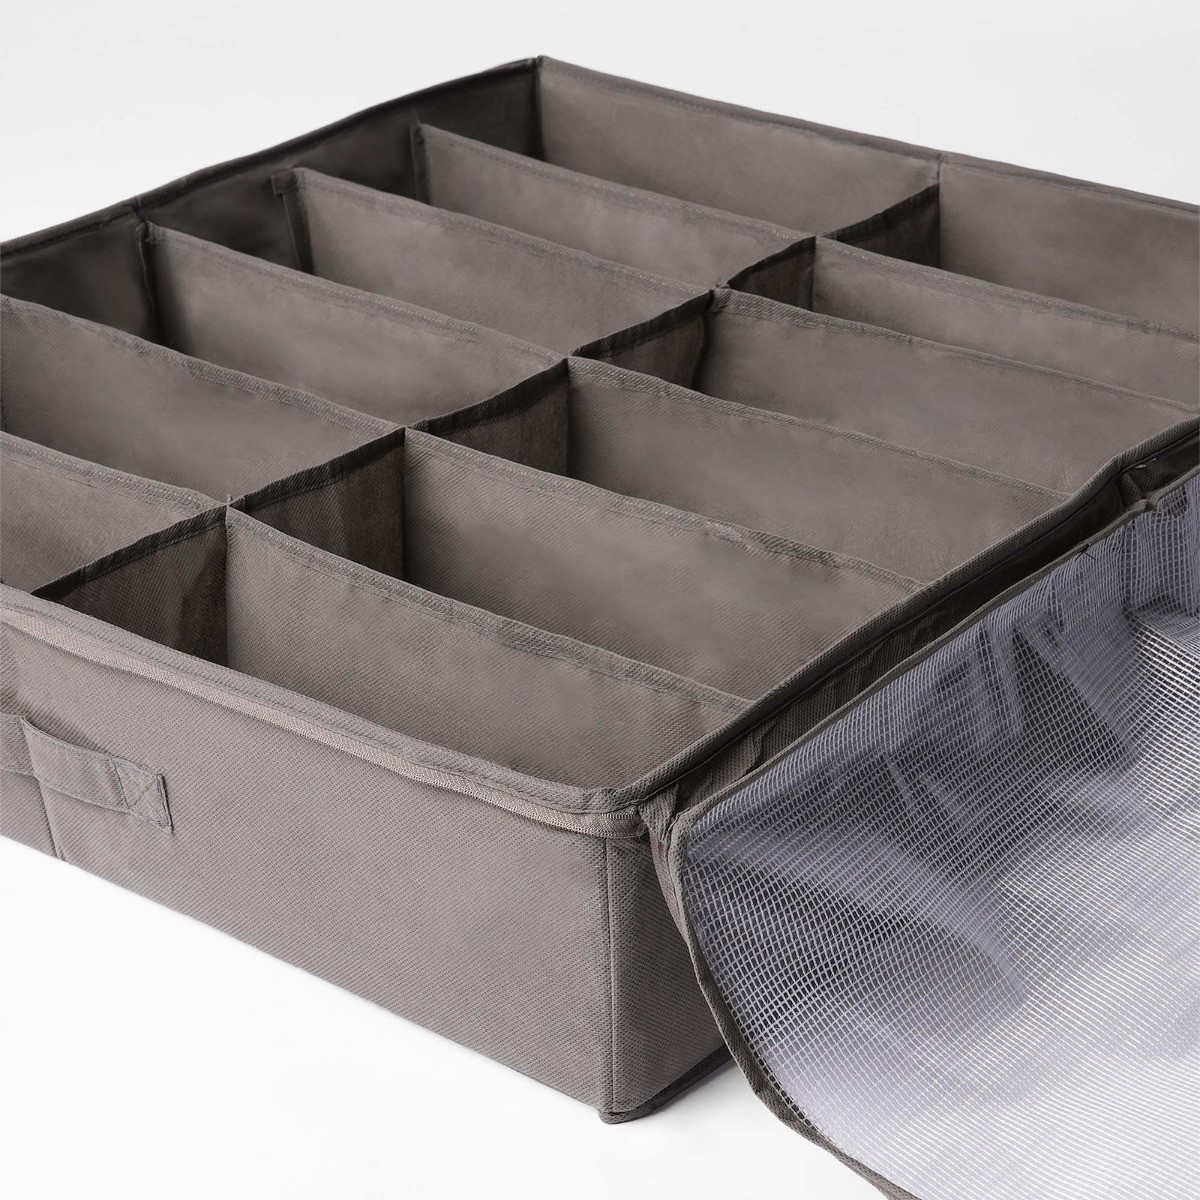 OHS 12 Grid Shoe Underbed Storage Box - Charcoal>